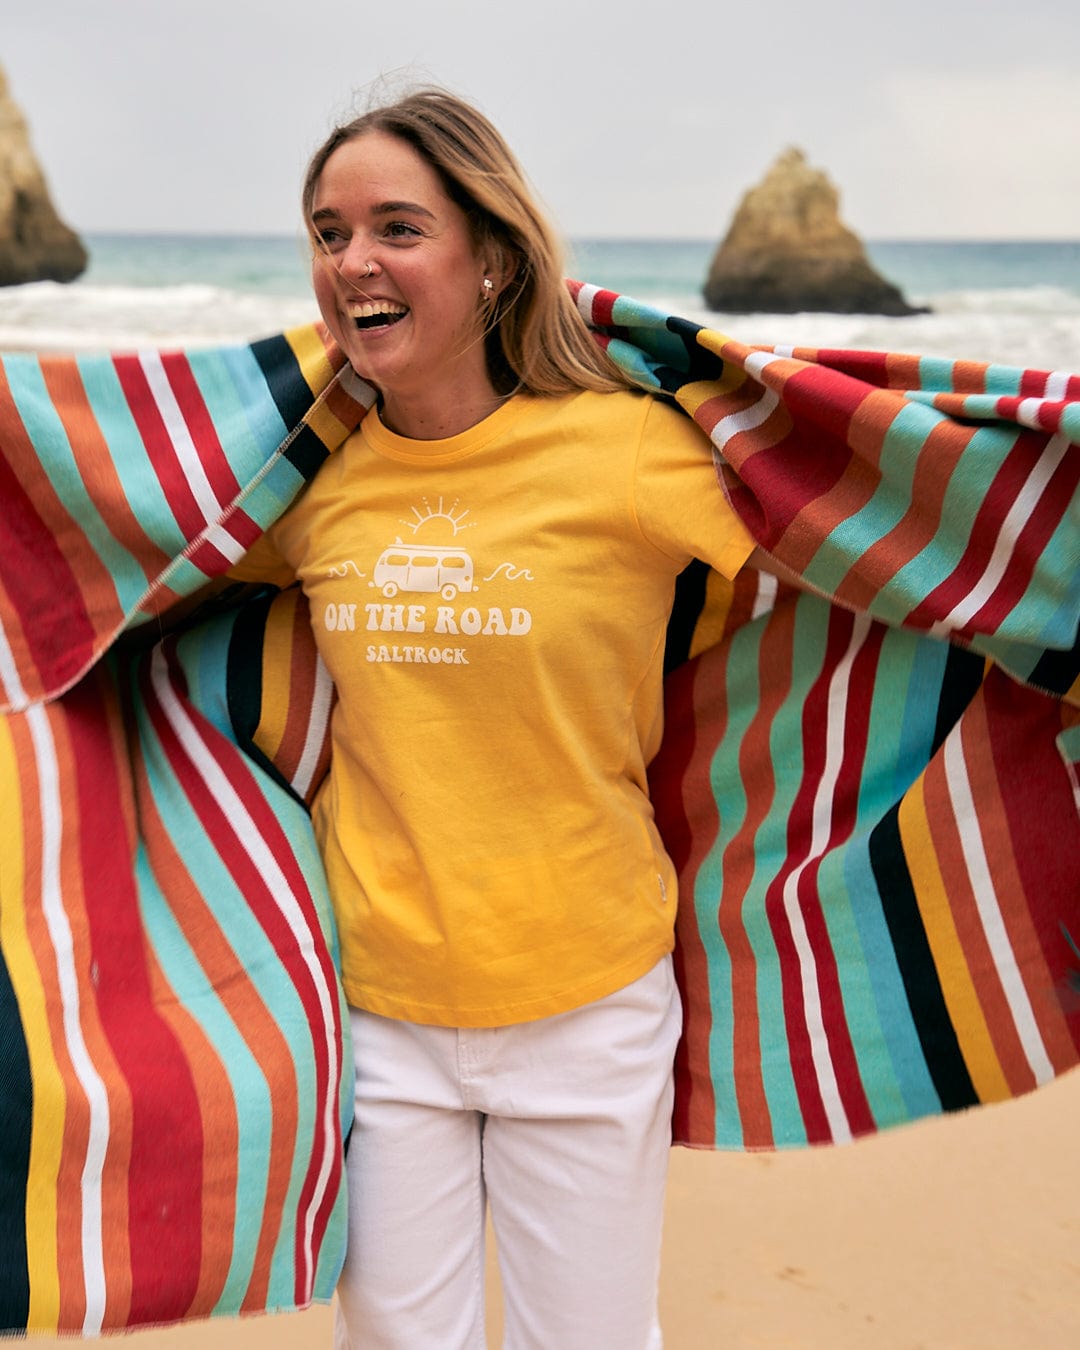 A woman wearing a yellow t-shirt holding a Saltrock Recycled Picnic Blanket - Multi on the beach.